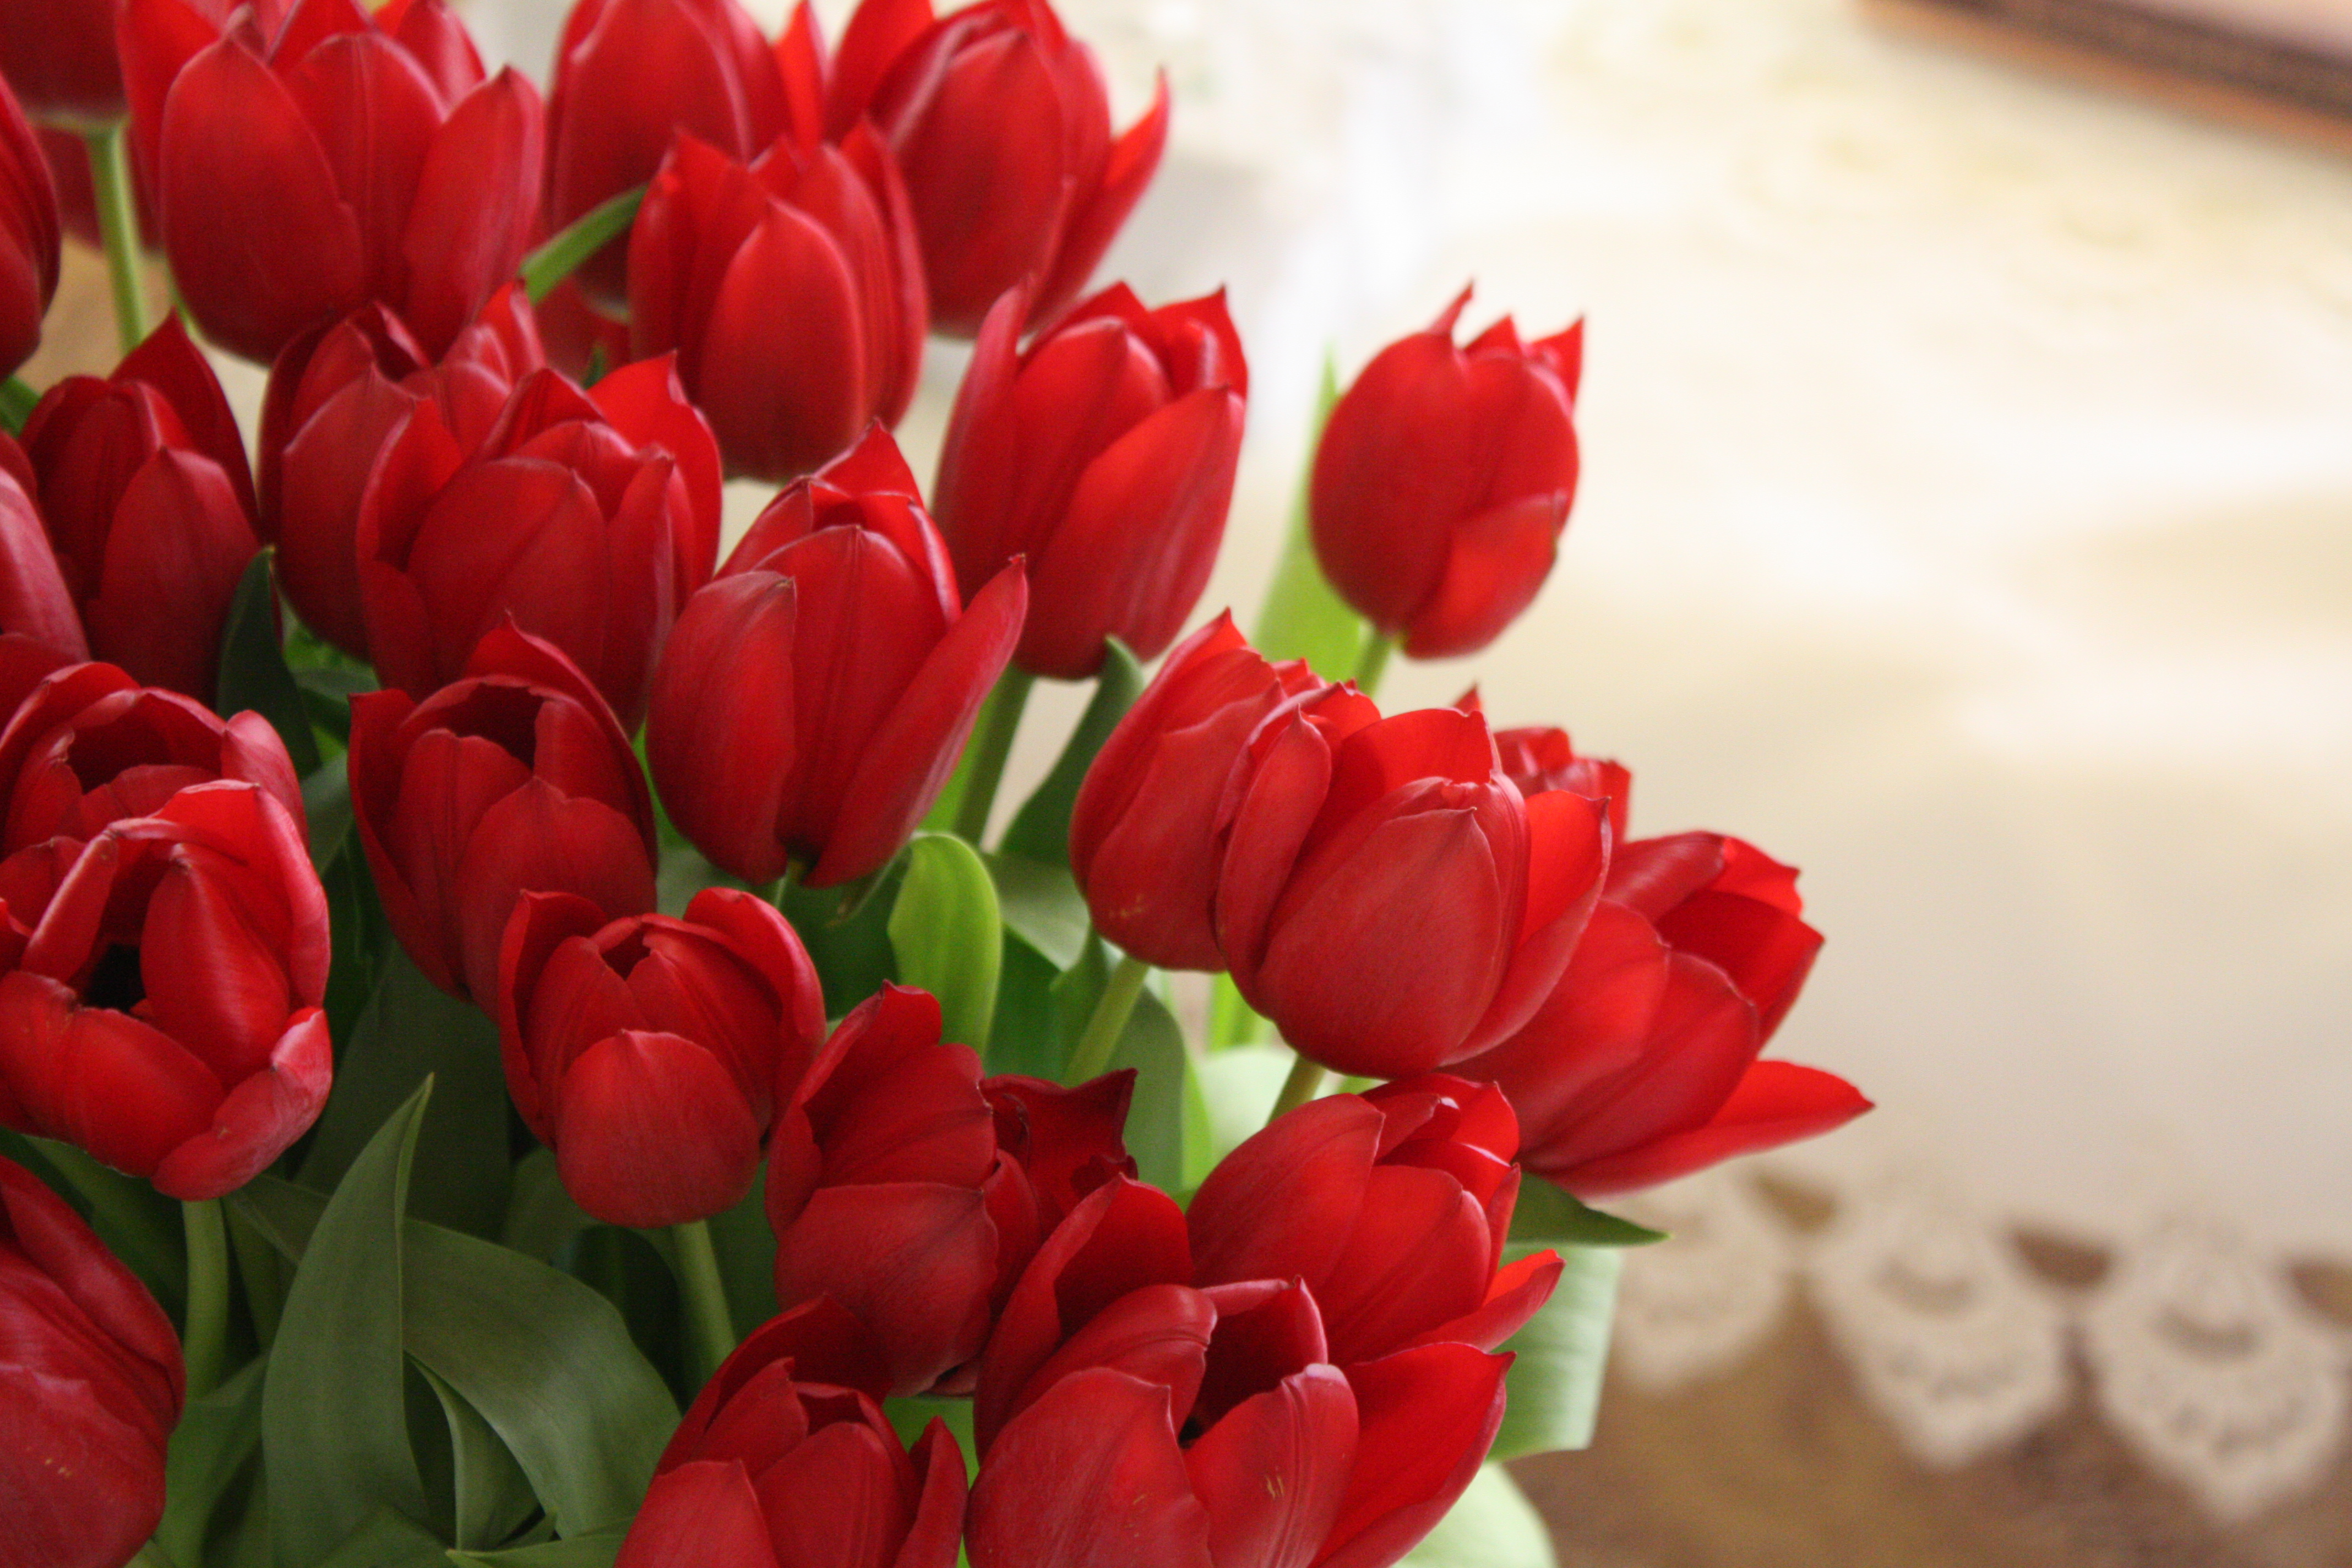 Cool Wallpaper Red Tulips